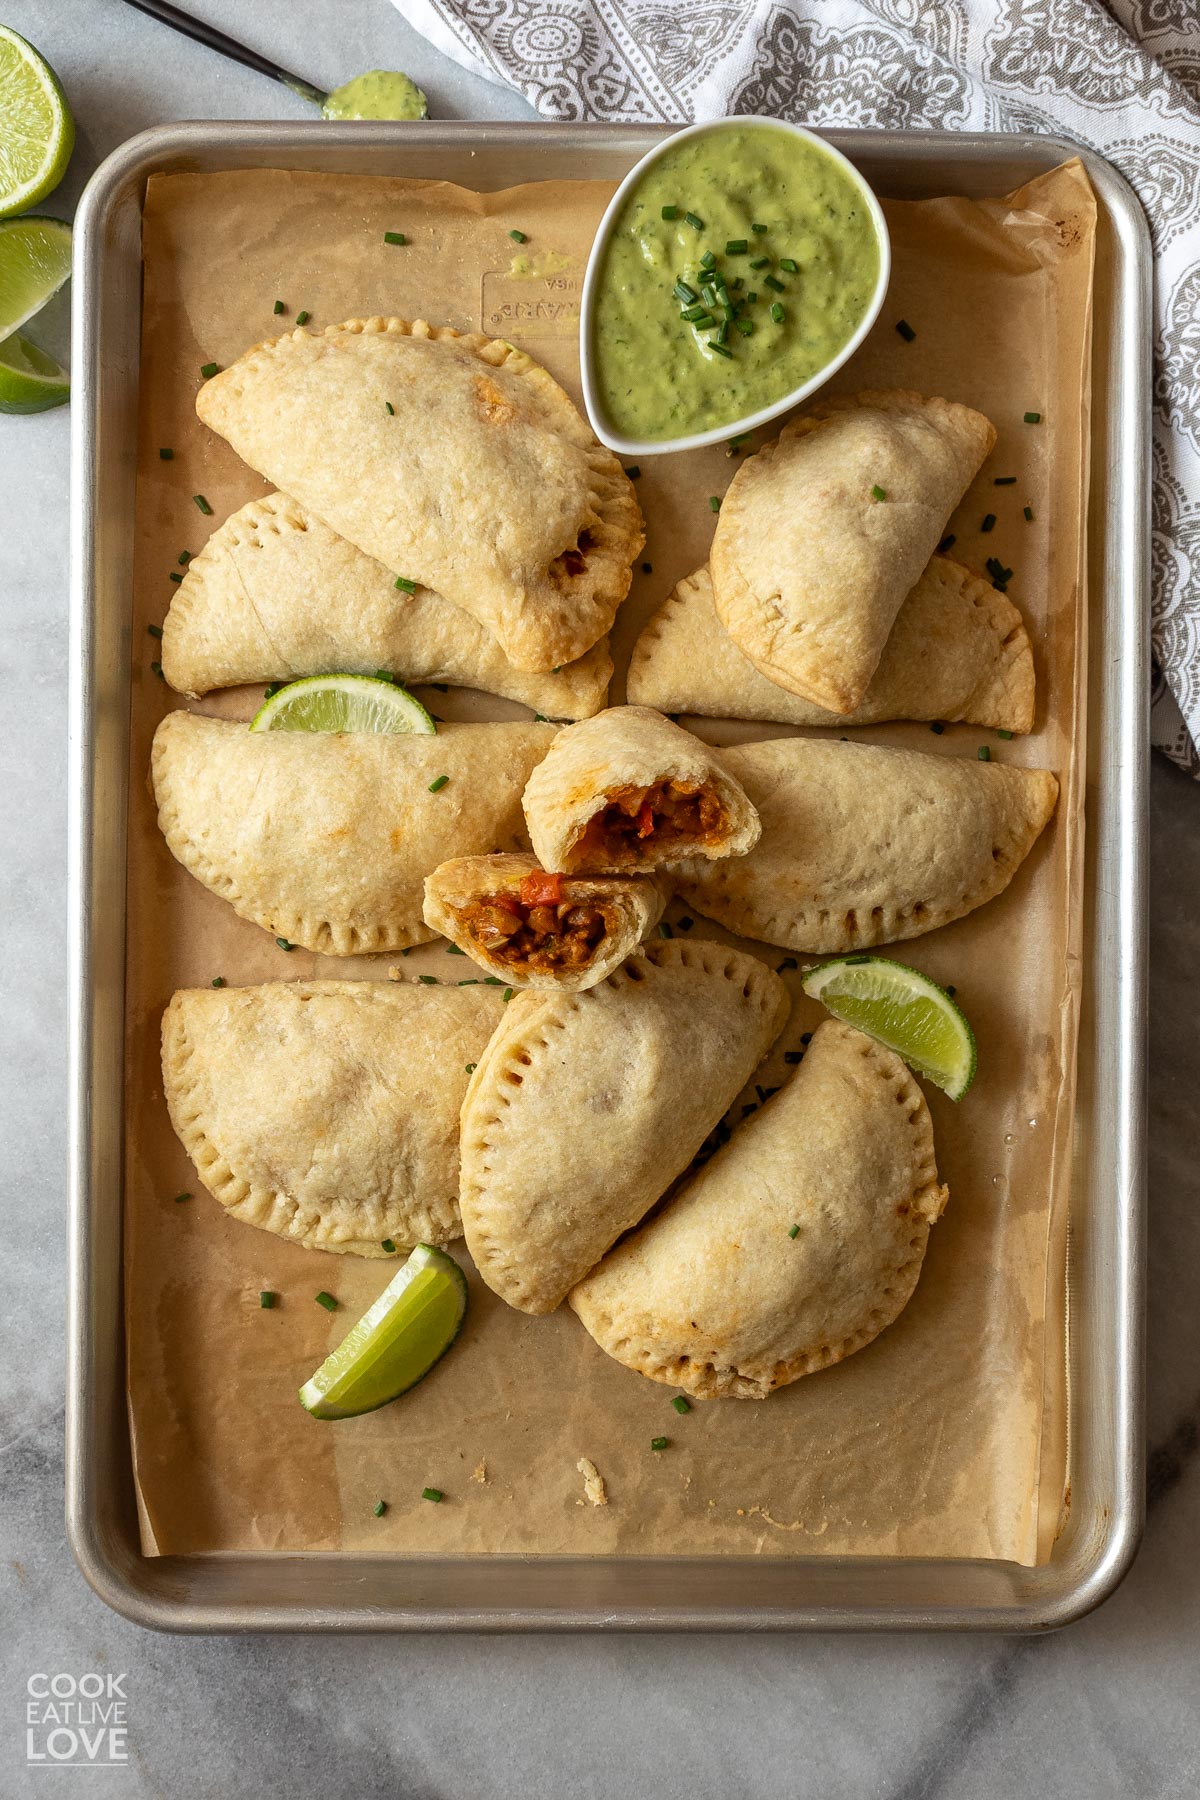 Baked empanadas on a baking tray with a bowl of green sauce and one in the middle broken in half.